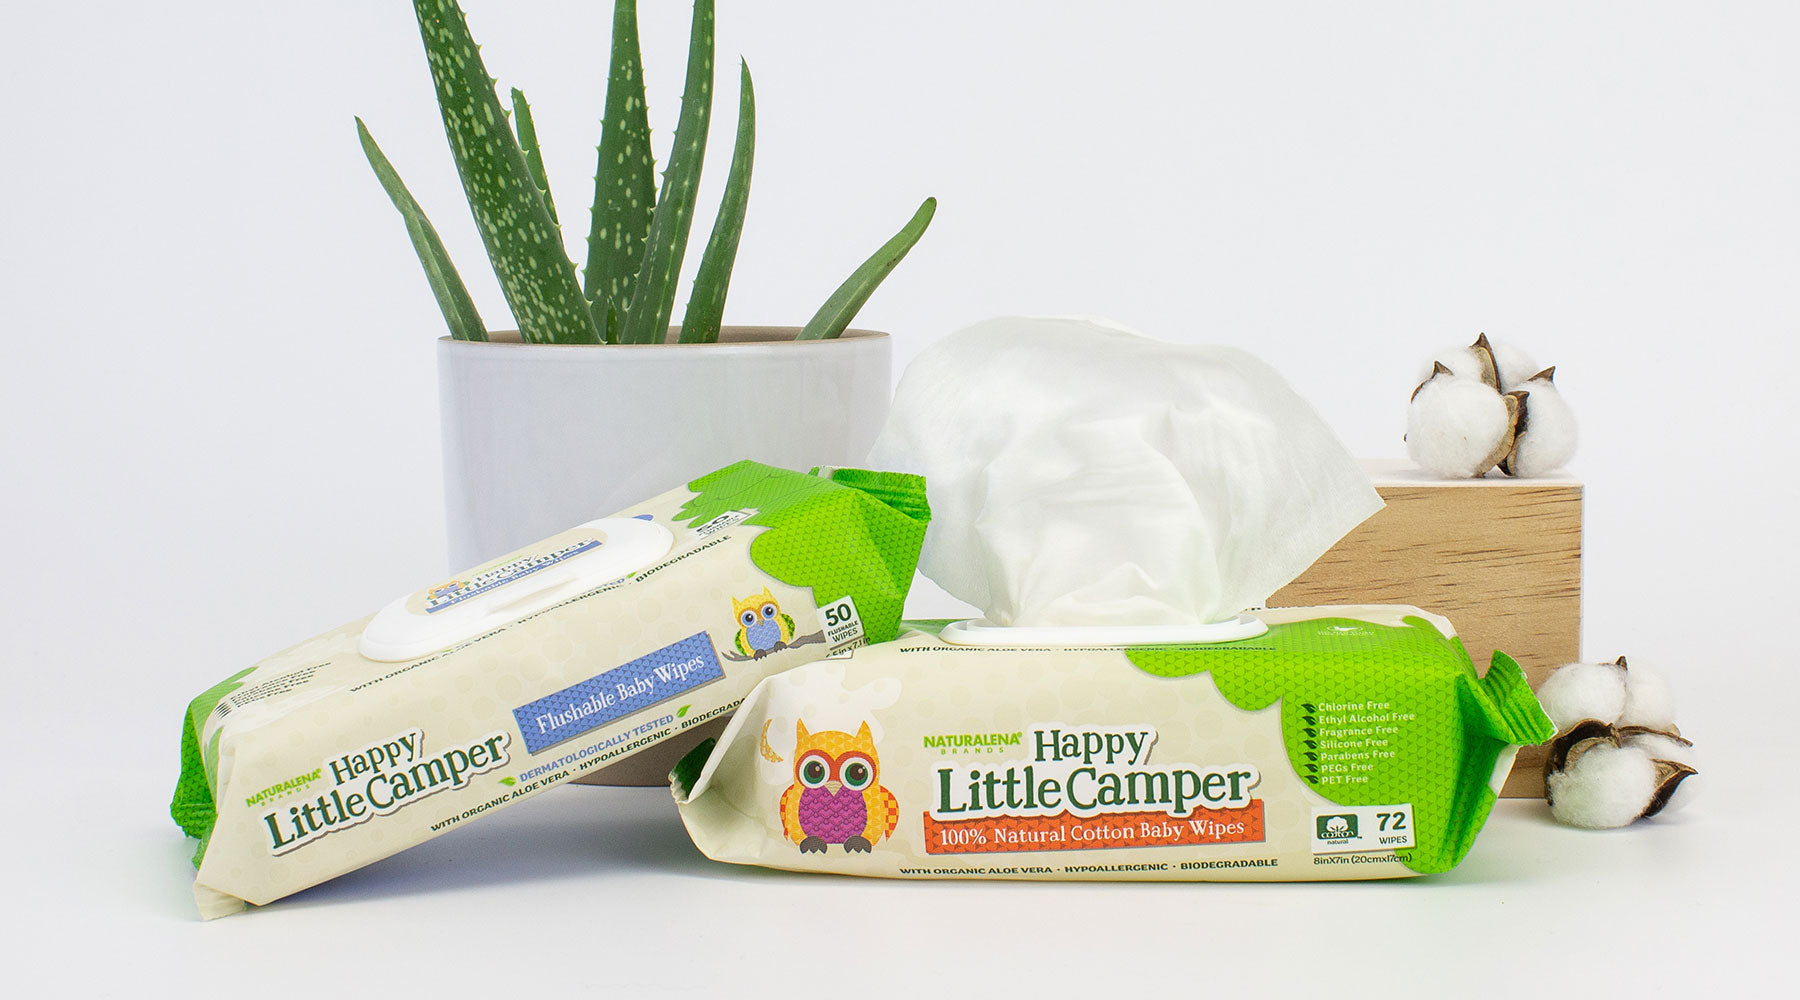 Happy Little Camper baby wipes with Aloe Vera Plant and Cotton Buds